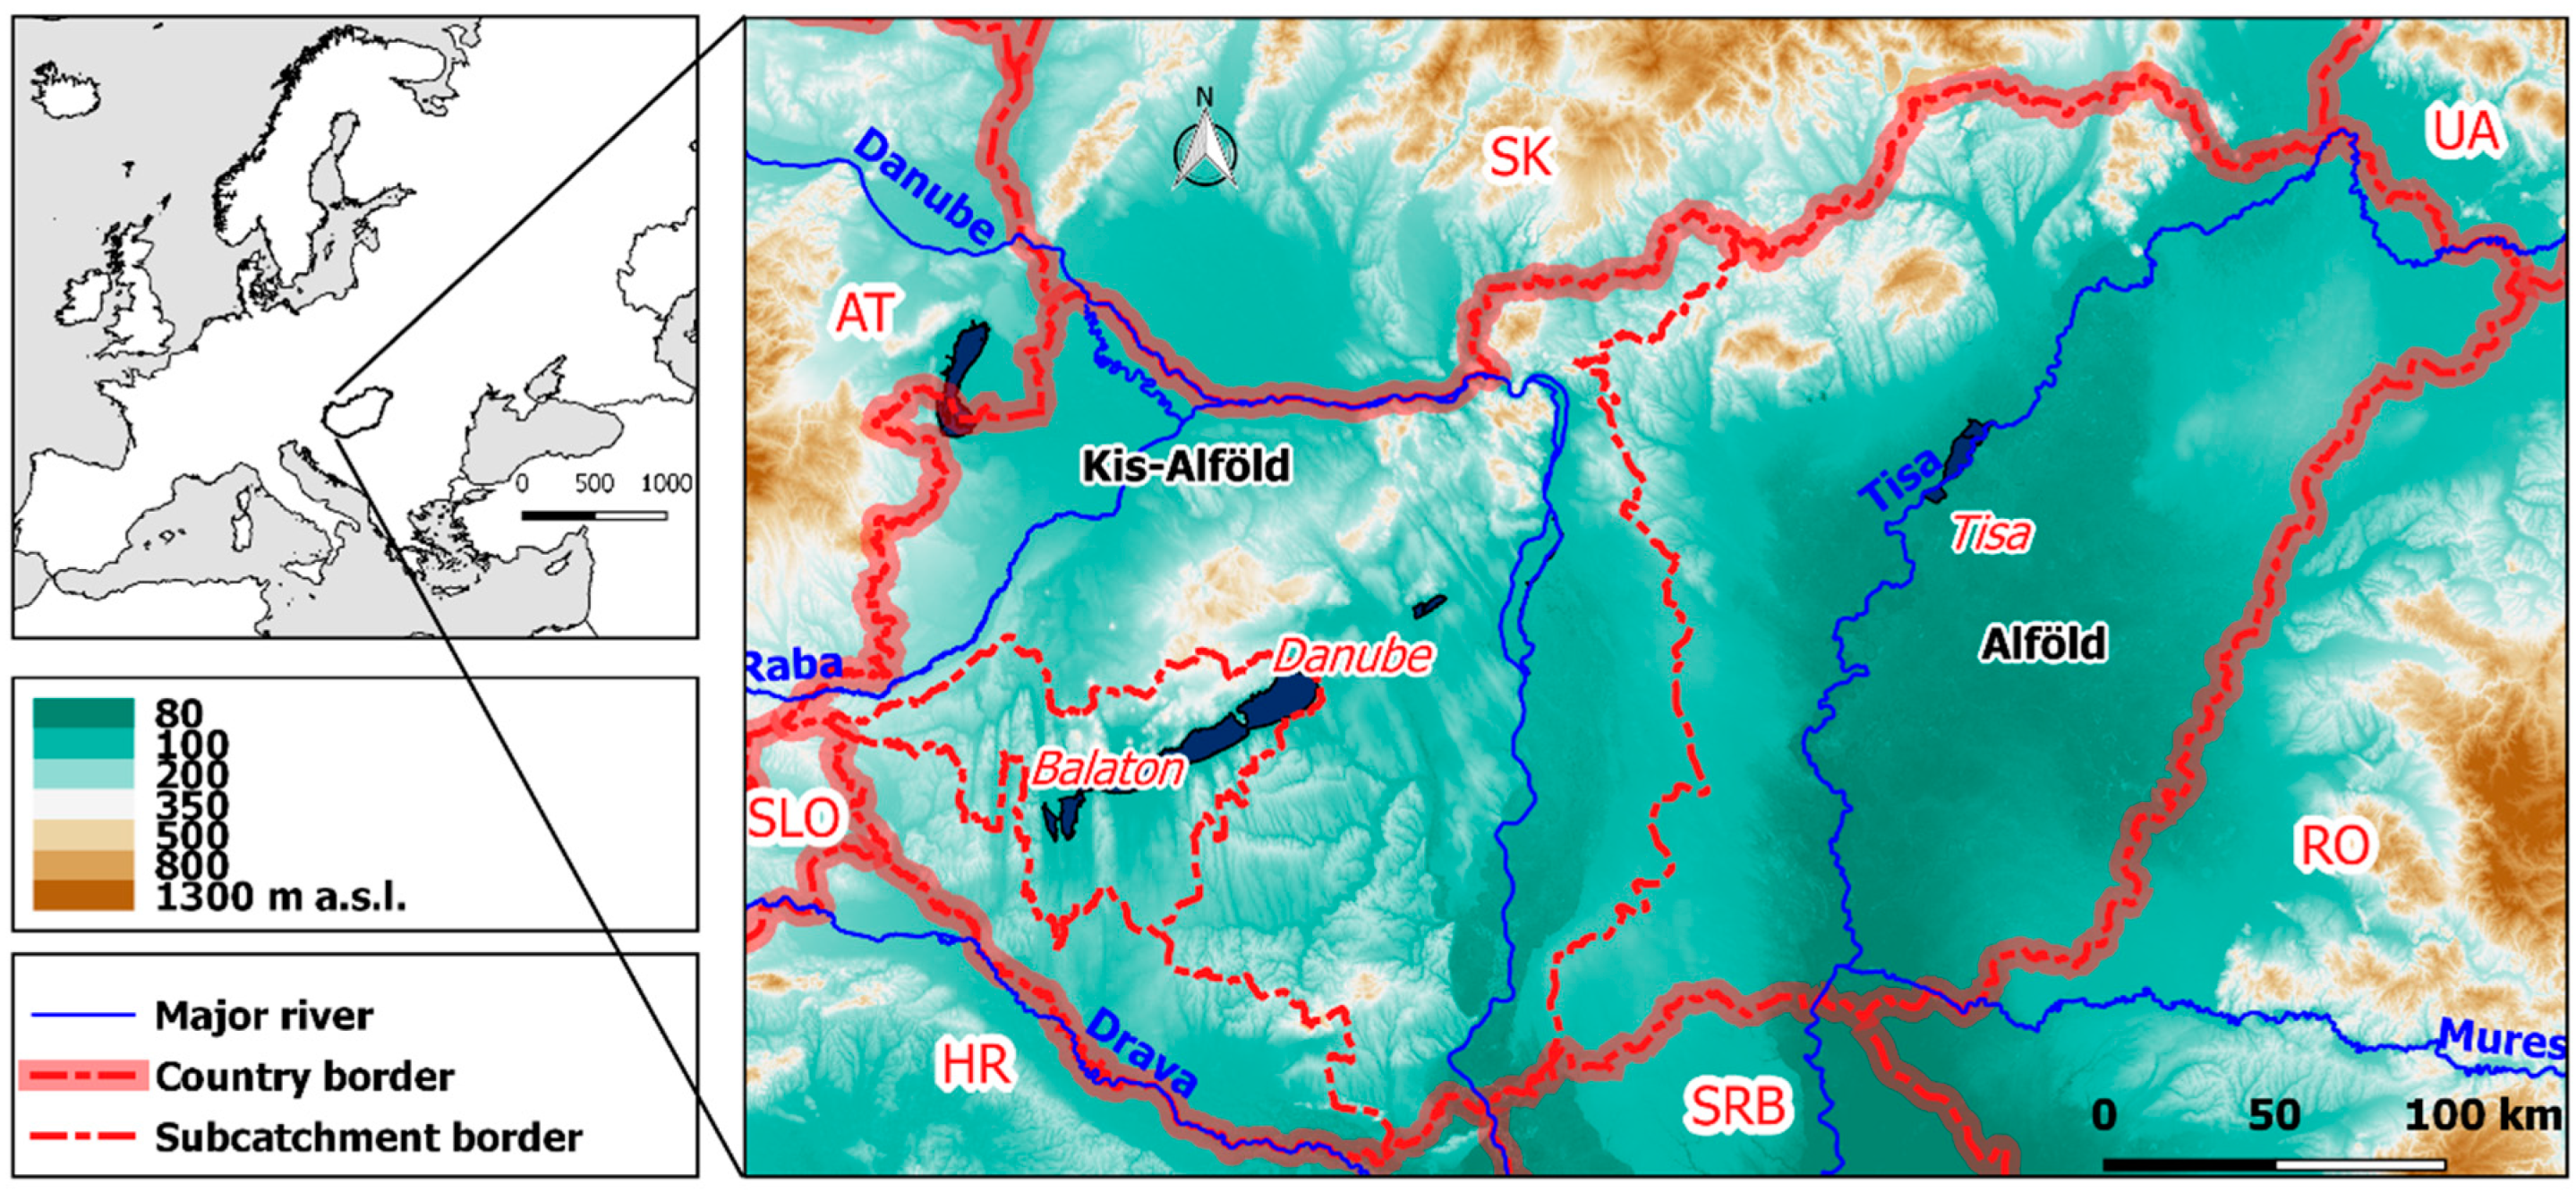 Water | Free Full-Text | Modification of the MONERIS Nutrient Emission  Model for a Lowland Country (Hungary) to Support River Basin Management  Planning in the Danube River Basin